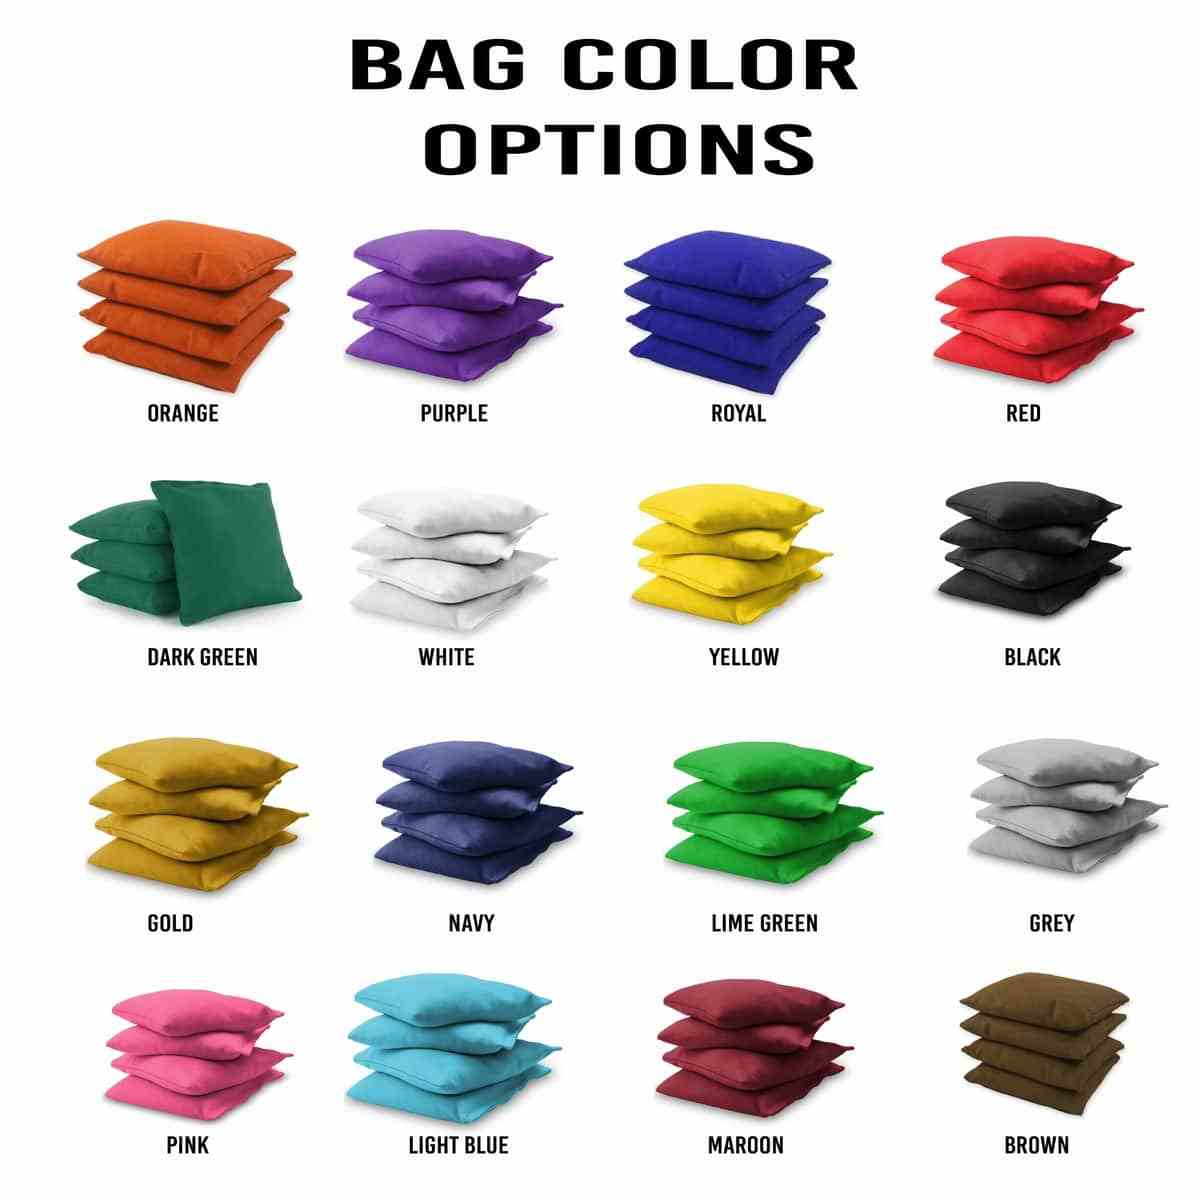 Pointed 2x4 bag colors